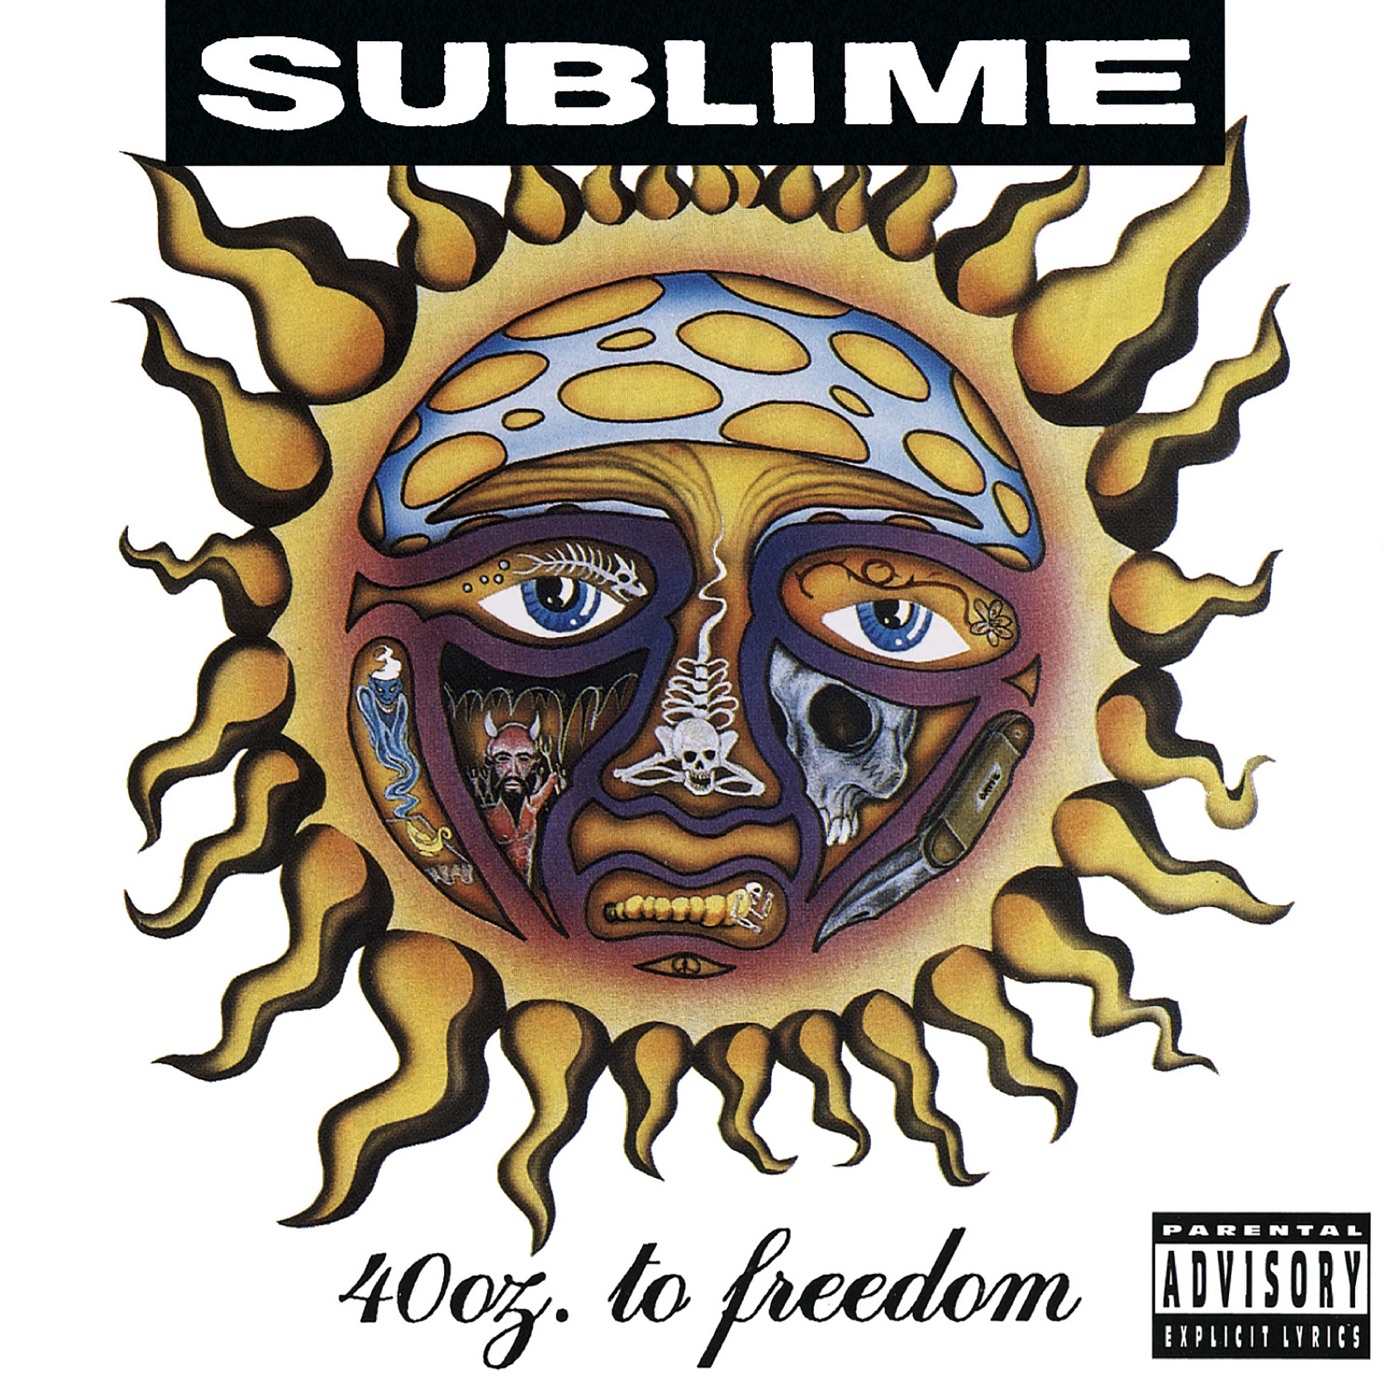 40oz. To Freedom by Sublime